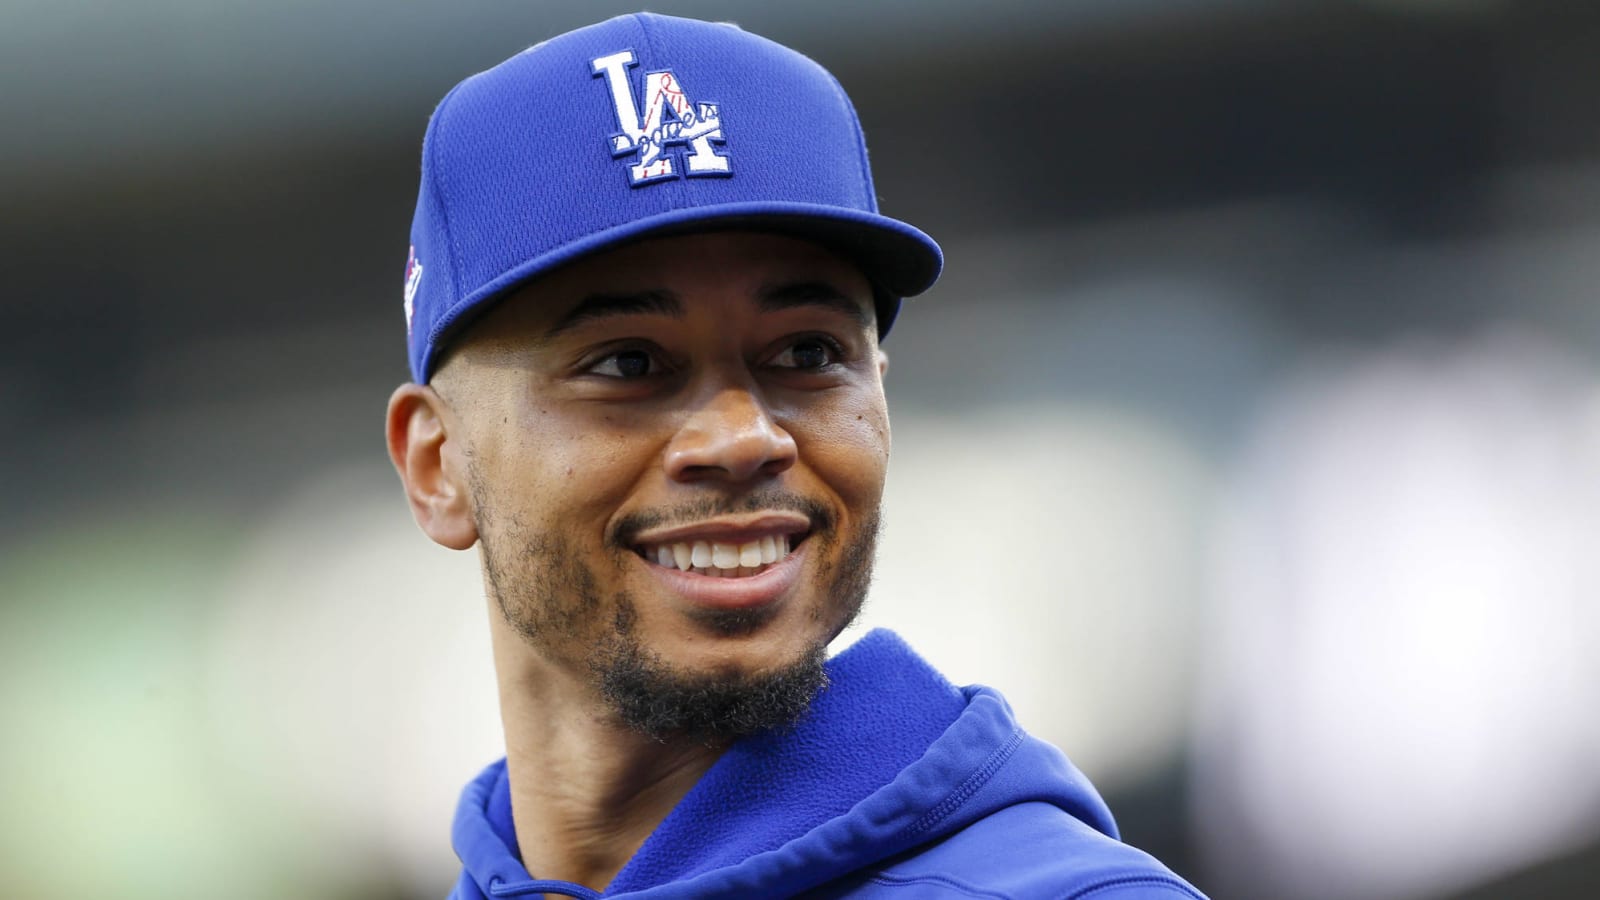 Dodgers' Betts out vs. Mariners, but X-rays on arm negative